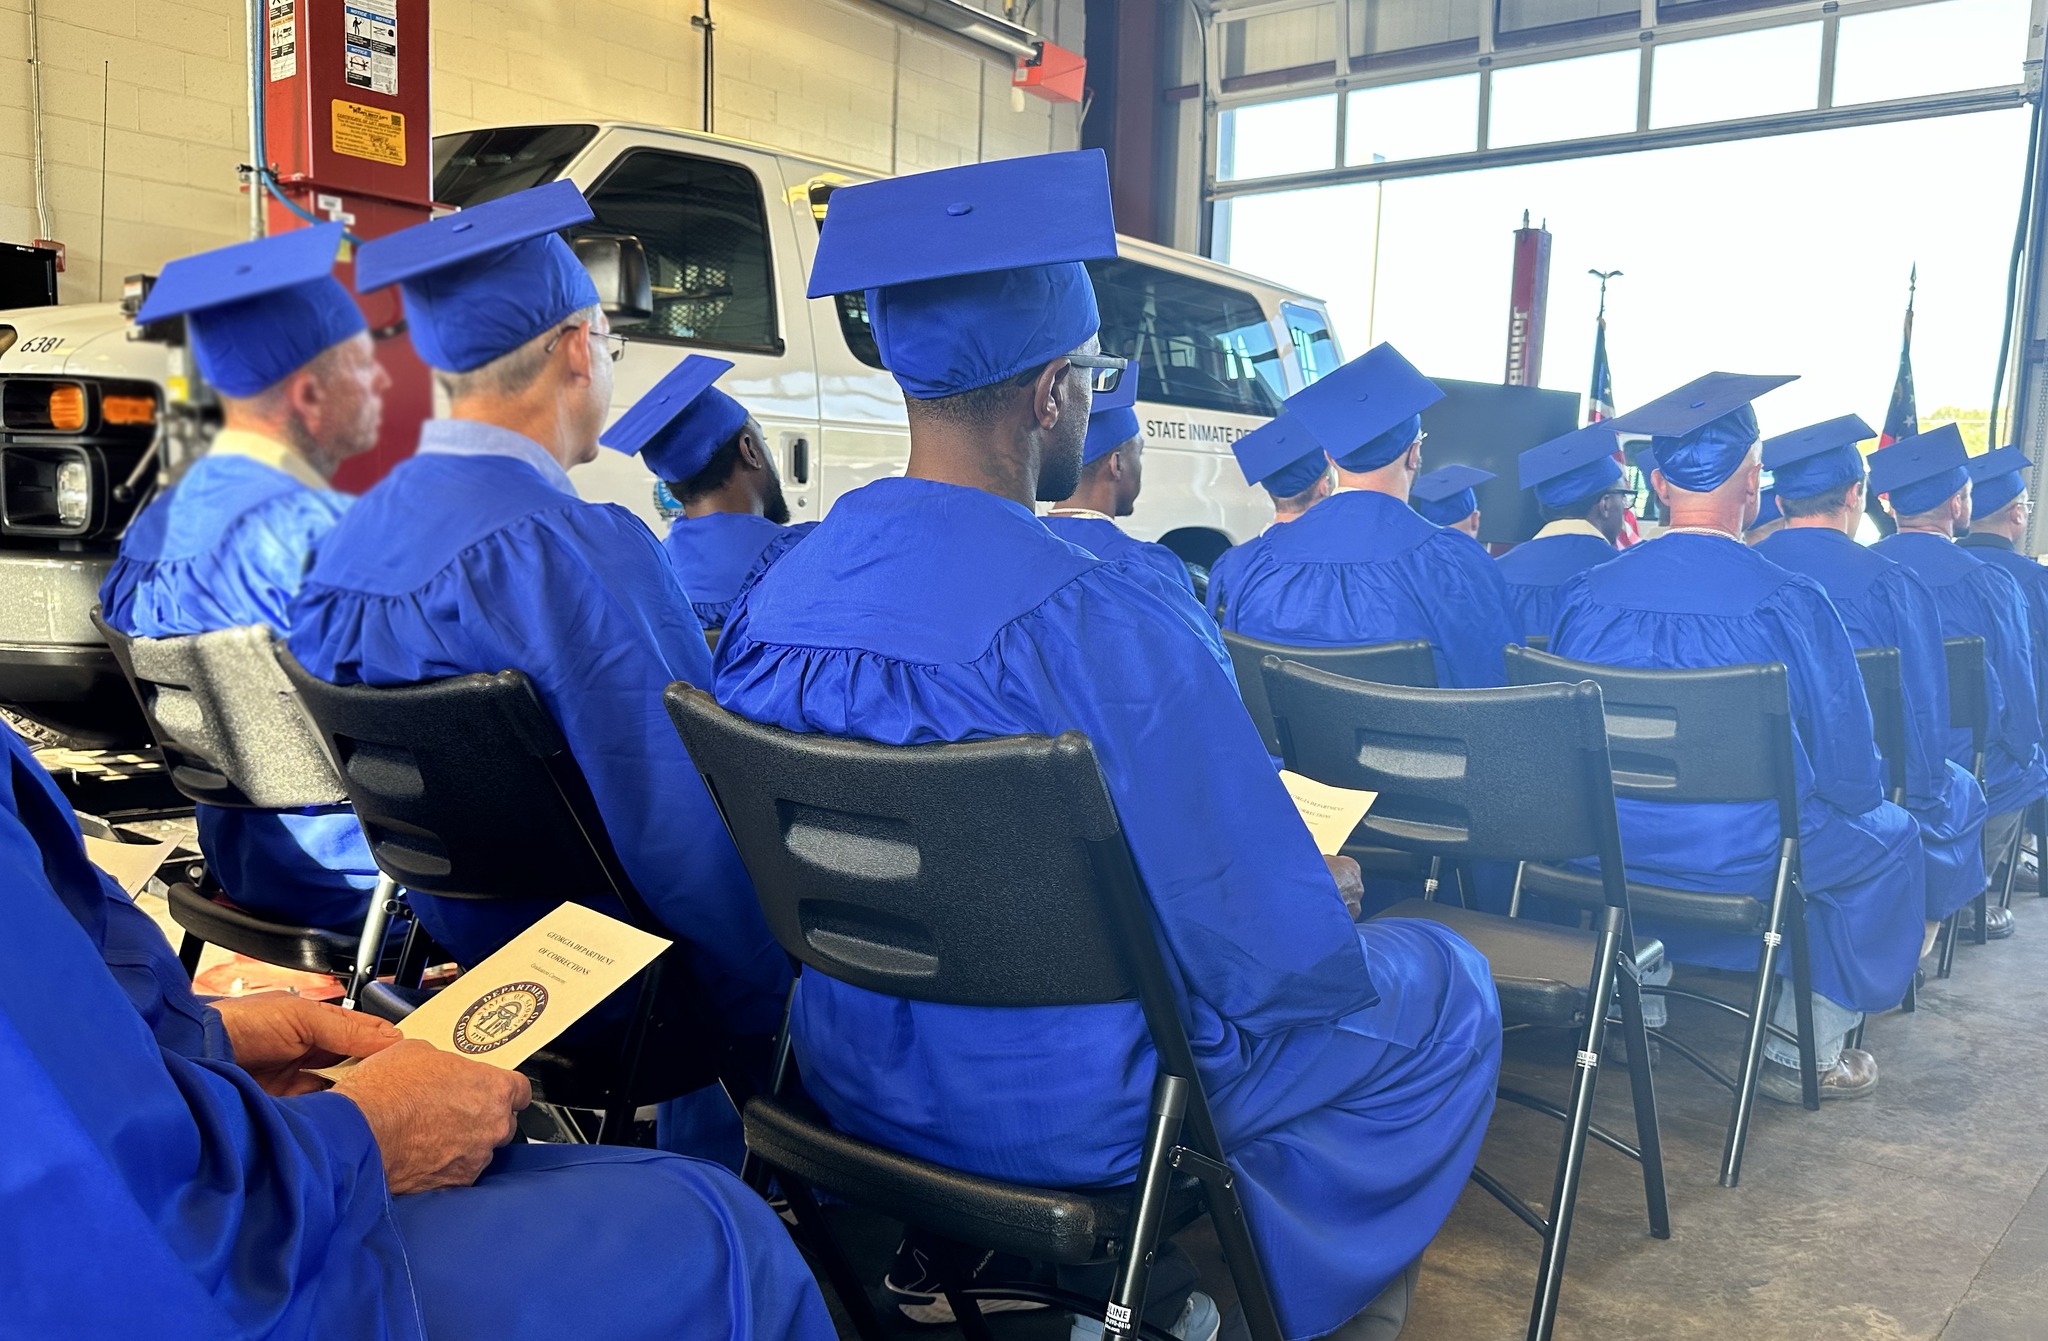 re-entry graduates sit at the ceremony